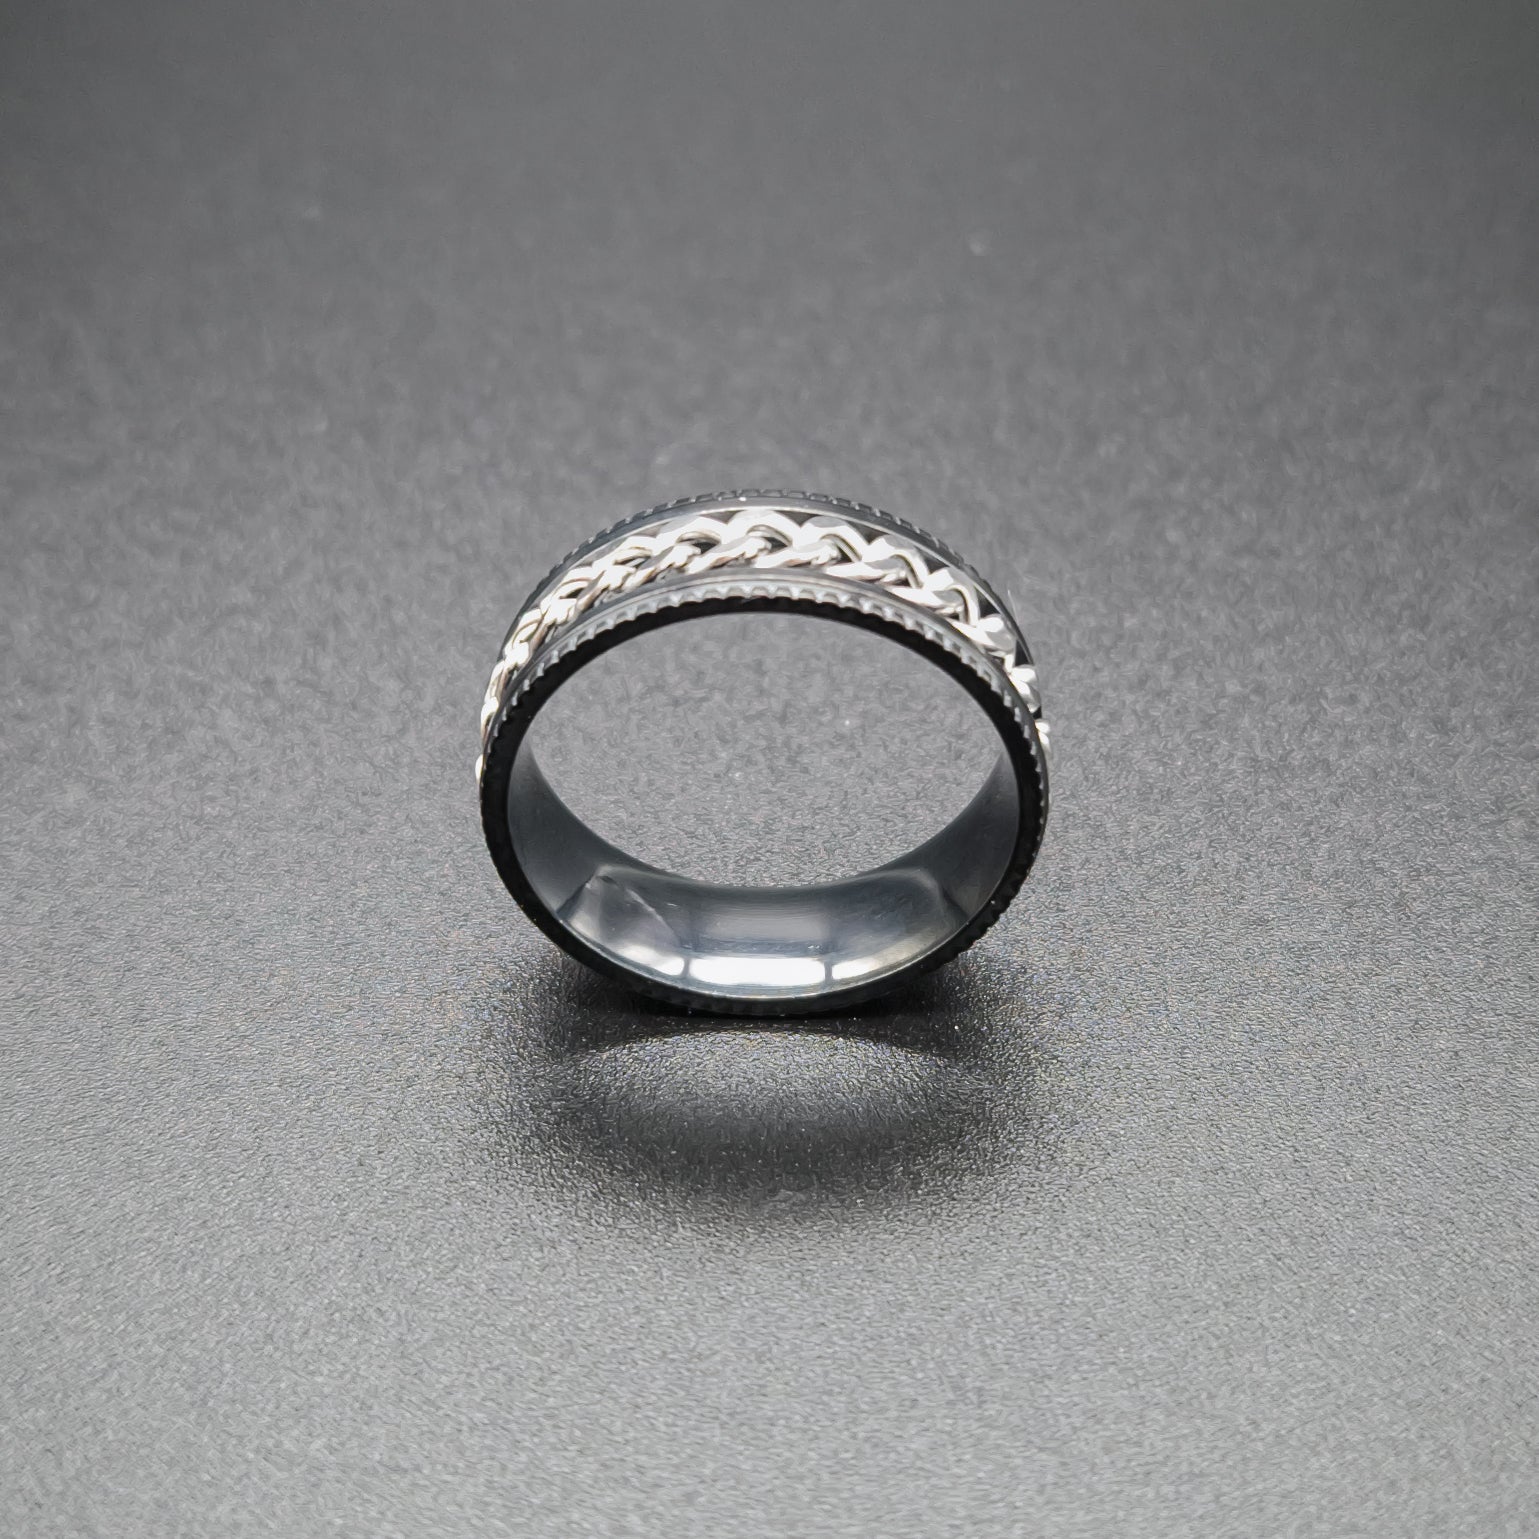 Spinning Chain Anxiety Ring